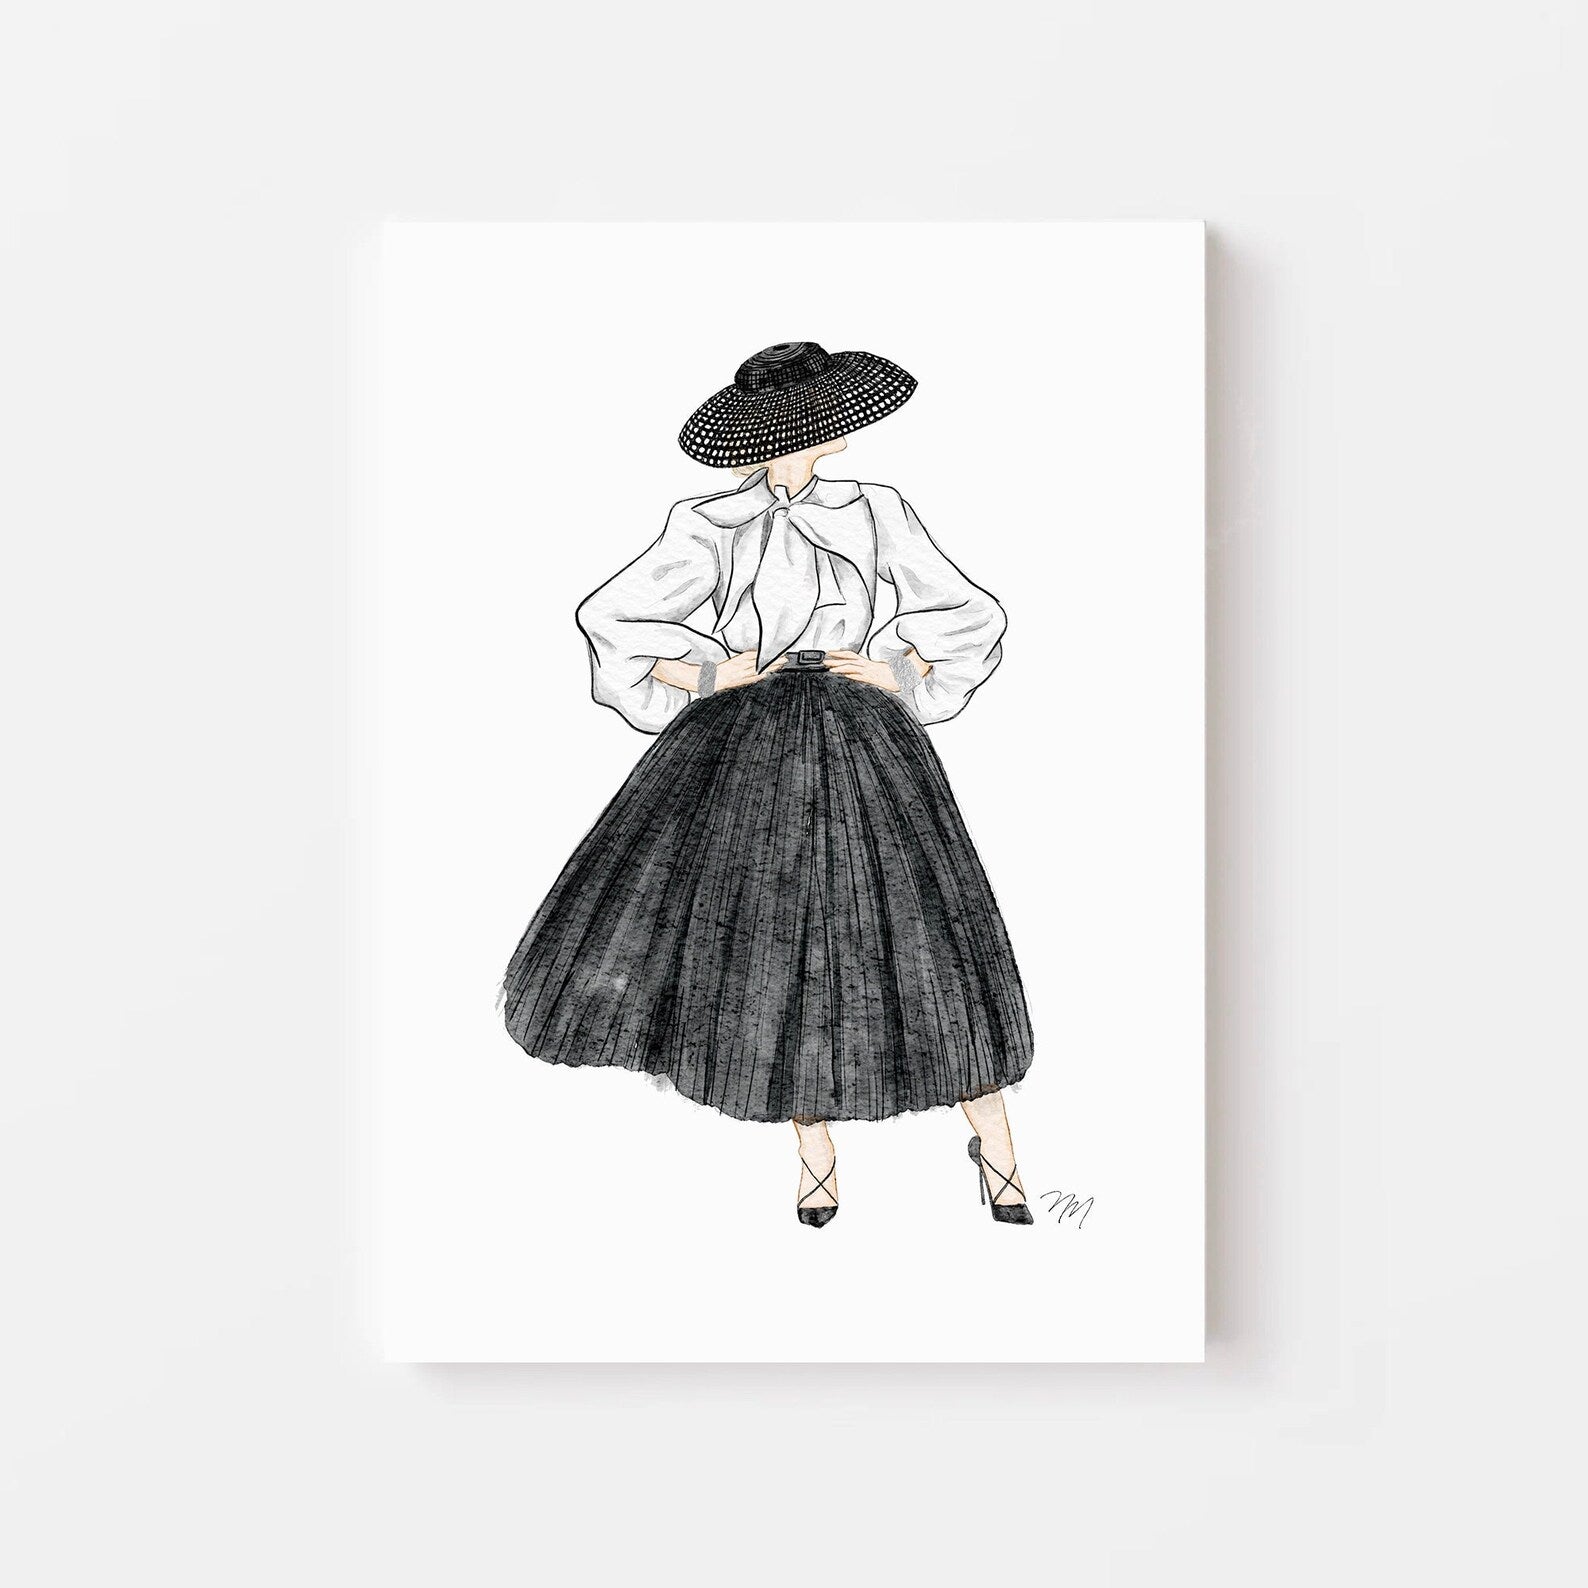 Classic black and white elegance inspired by Dior fashion